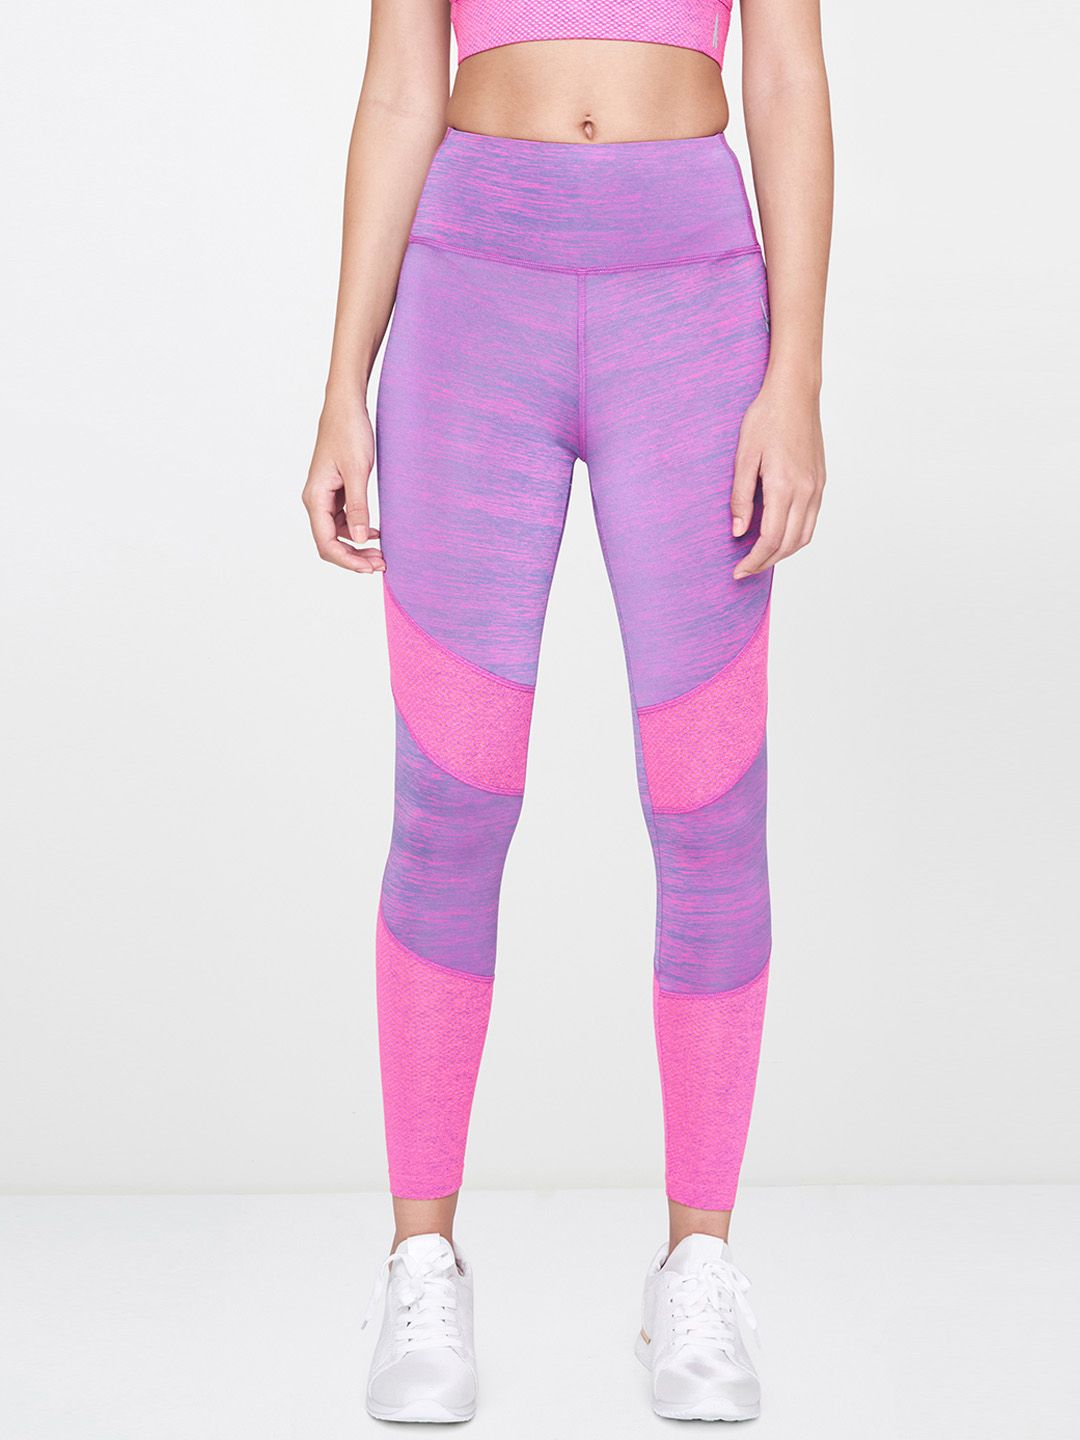 AND Women Pink & Purple Colourblocked Activewear Knitted Tights Price in India